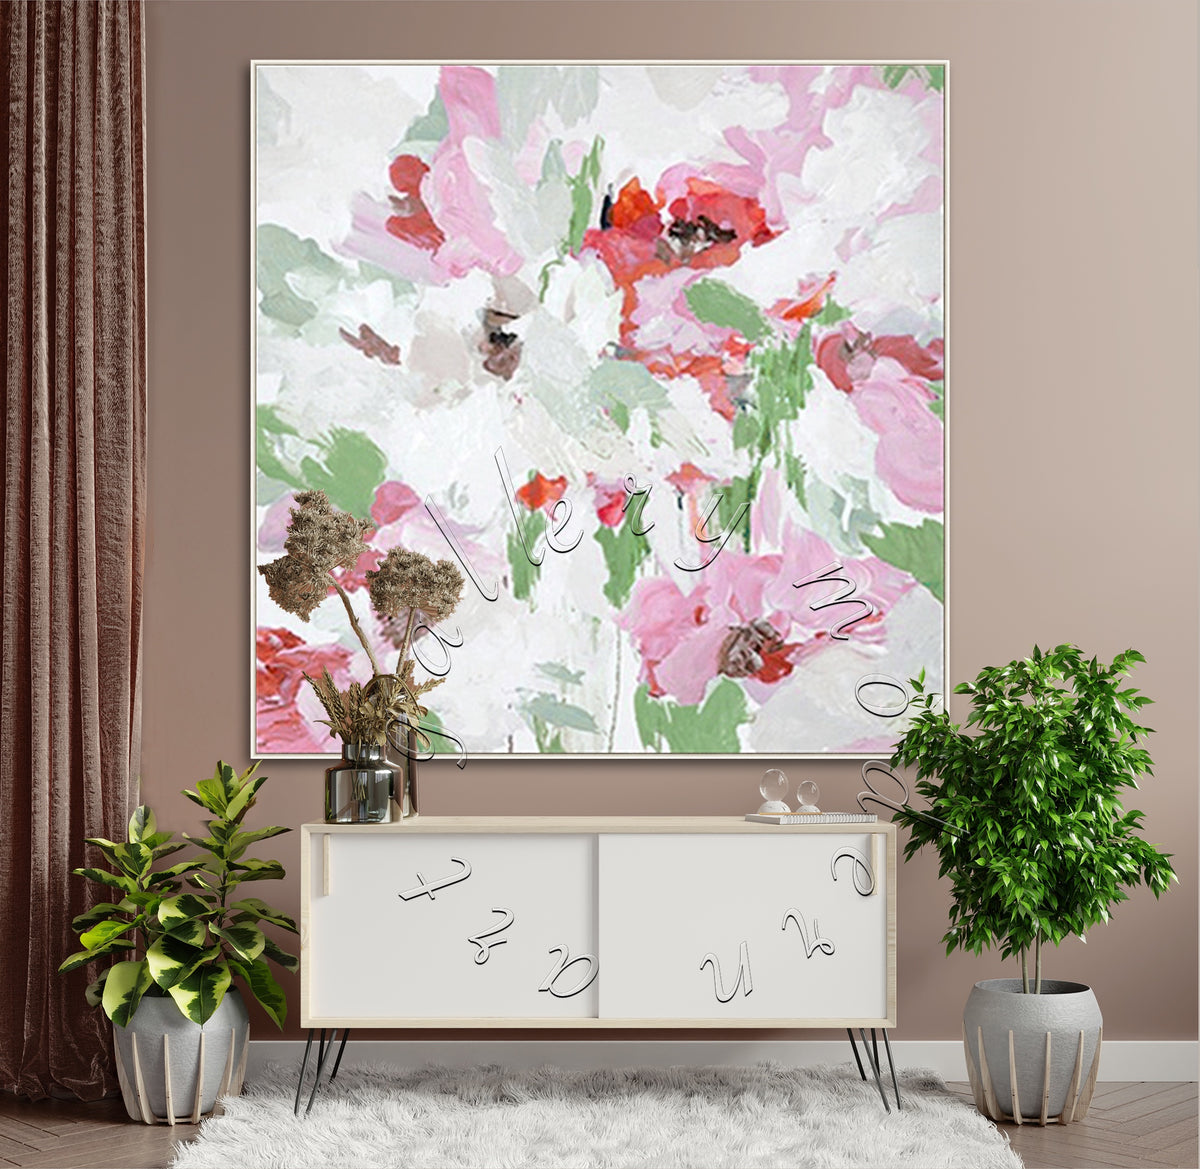 Abstract Original Painting, Soft Abstract Oil on Canvas, Square Wall Art &quot;Pink Flowers&quot;